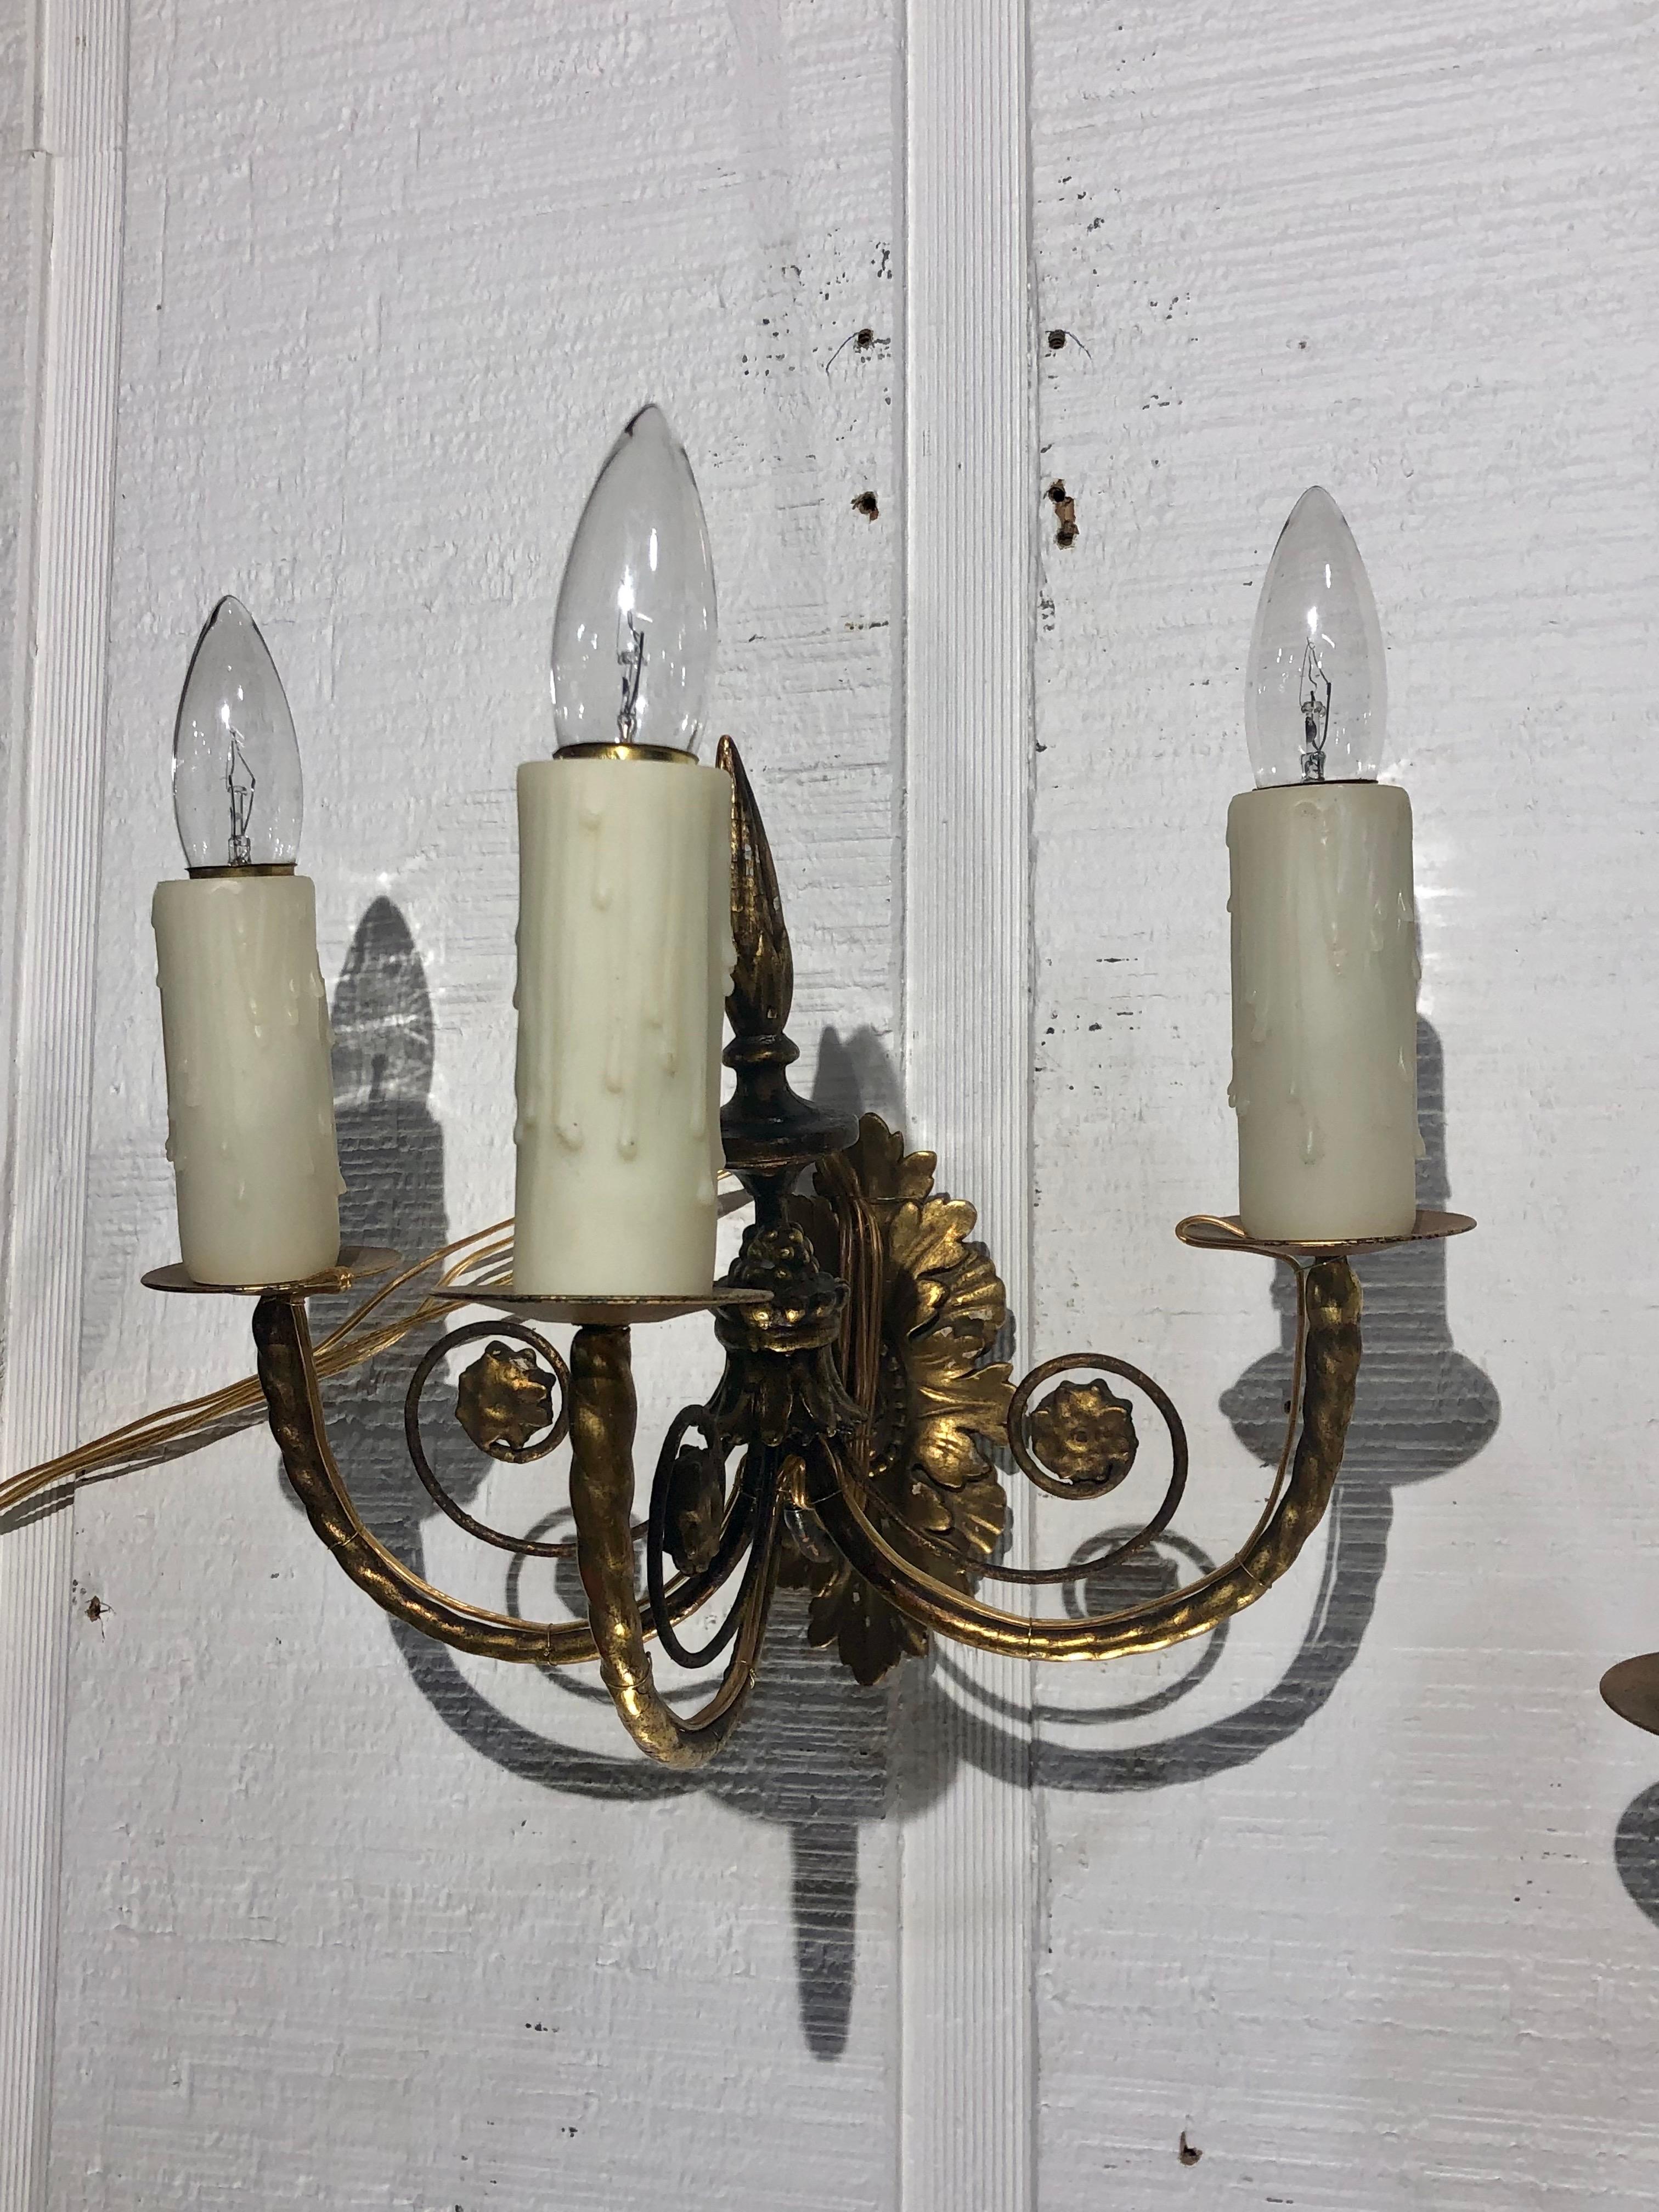 Pair of Italian Neoclassical Giltwood Sconces, 19th Century For Sale 7